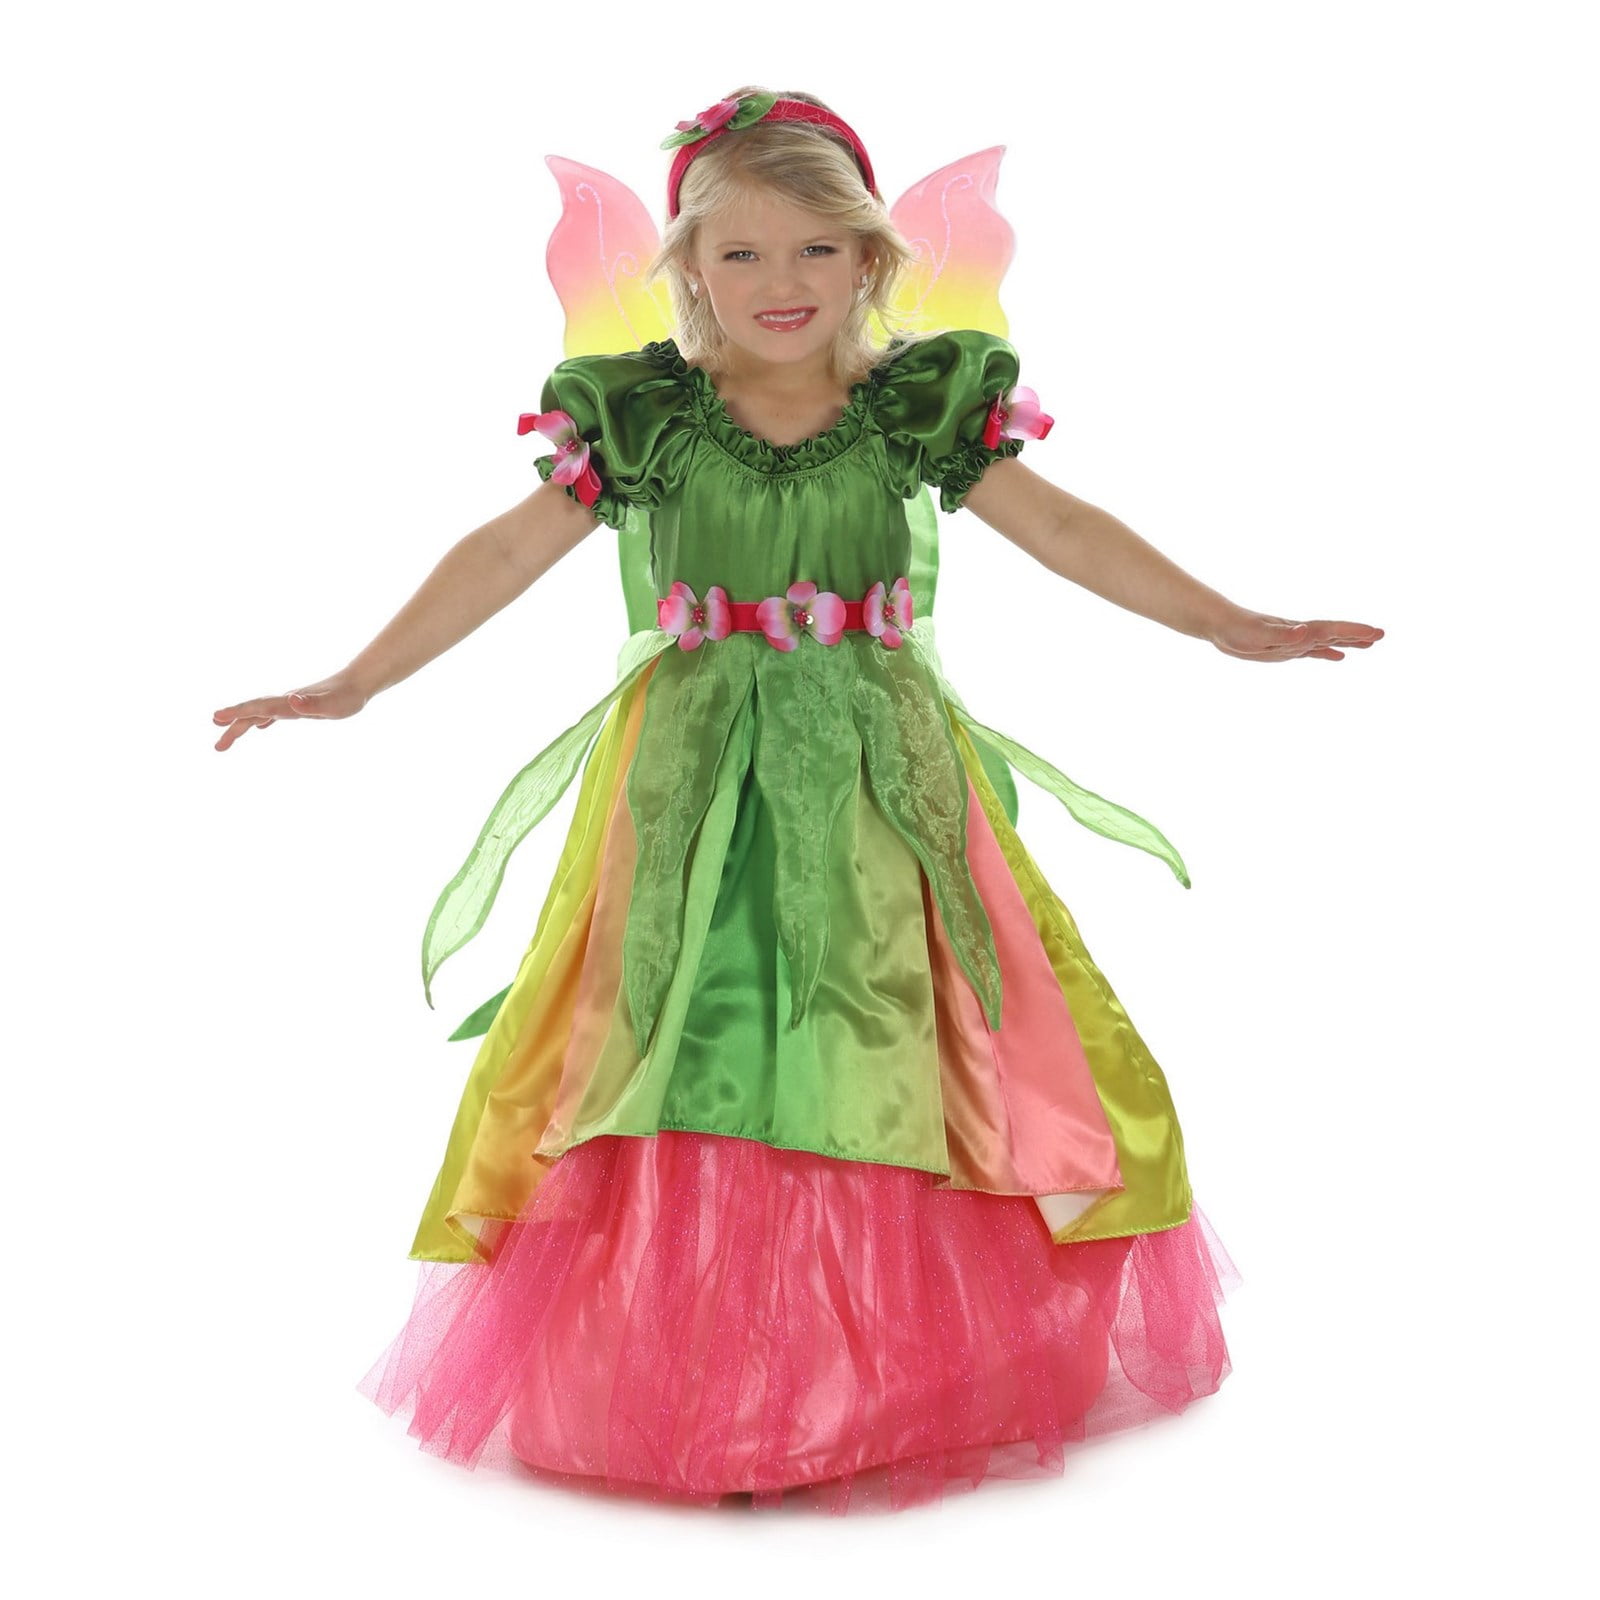 Uhdear Girls Butterlfy Princess Costume Deluxe Dress Up with Aceessories 